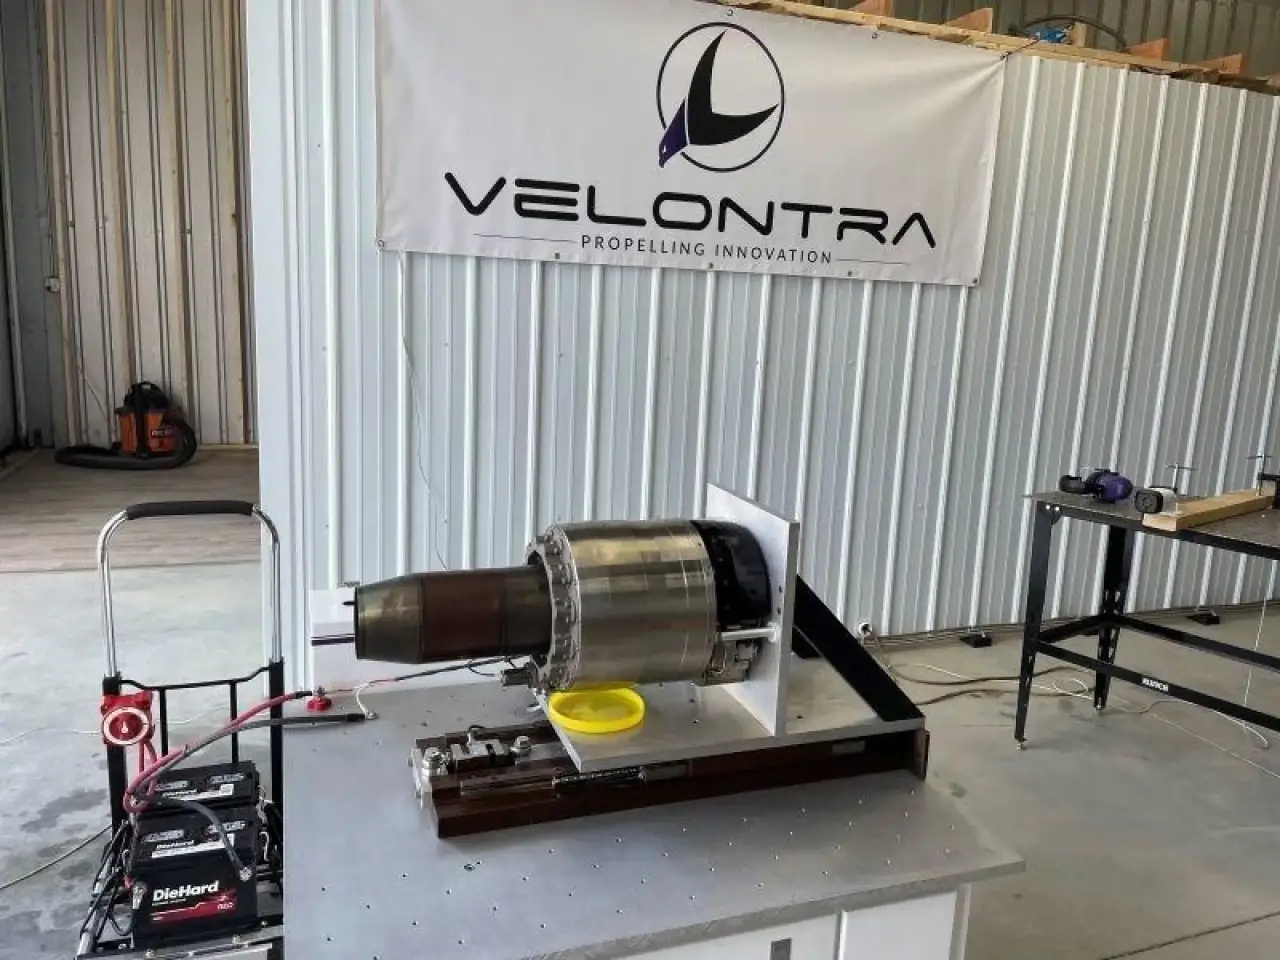 Velontra Contracts with Venus Aerospace to Deliver a Propulsion System Enabling Airflights img#1